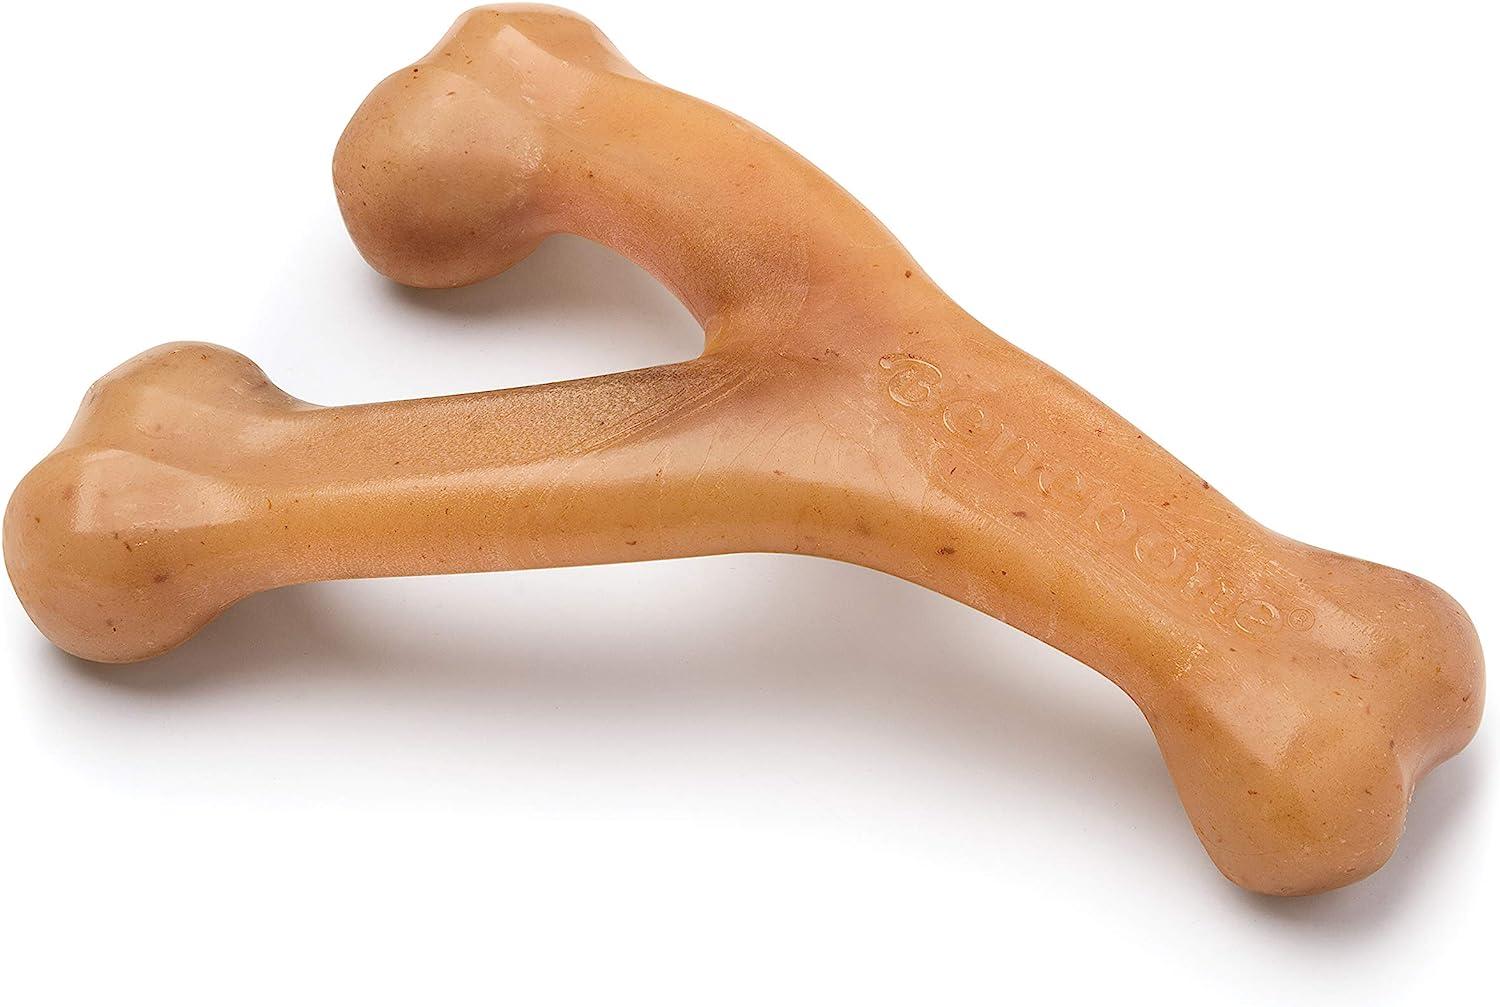 Benebone Wishbone Durable Dog Chew Toy for $4.94 Shipped